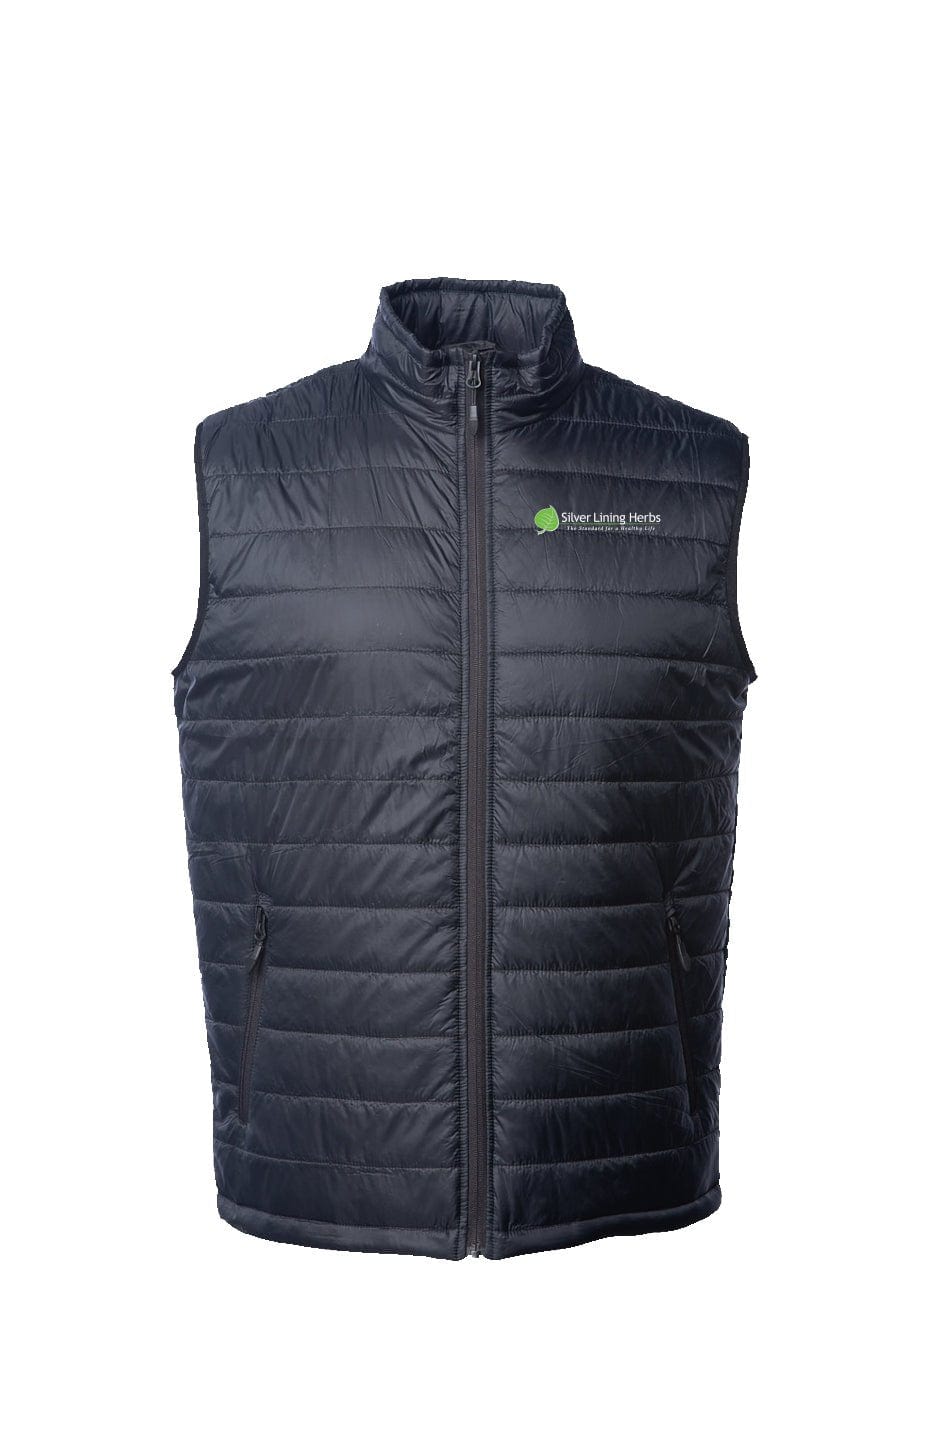 Mens Puffer Vest - Silver Lining Herbs